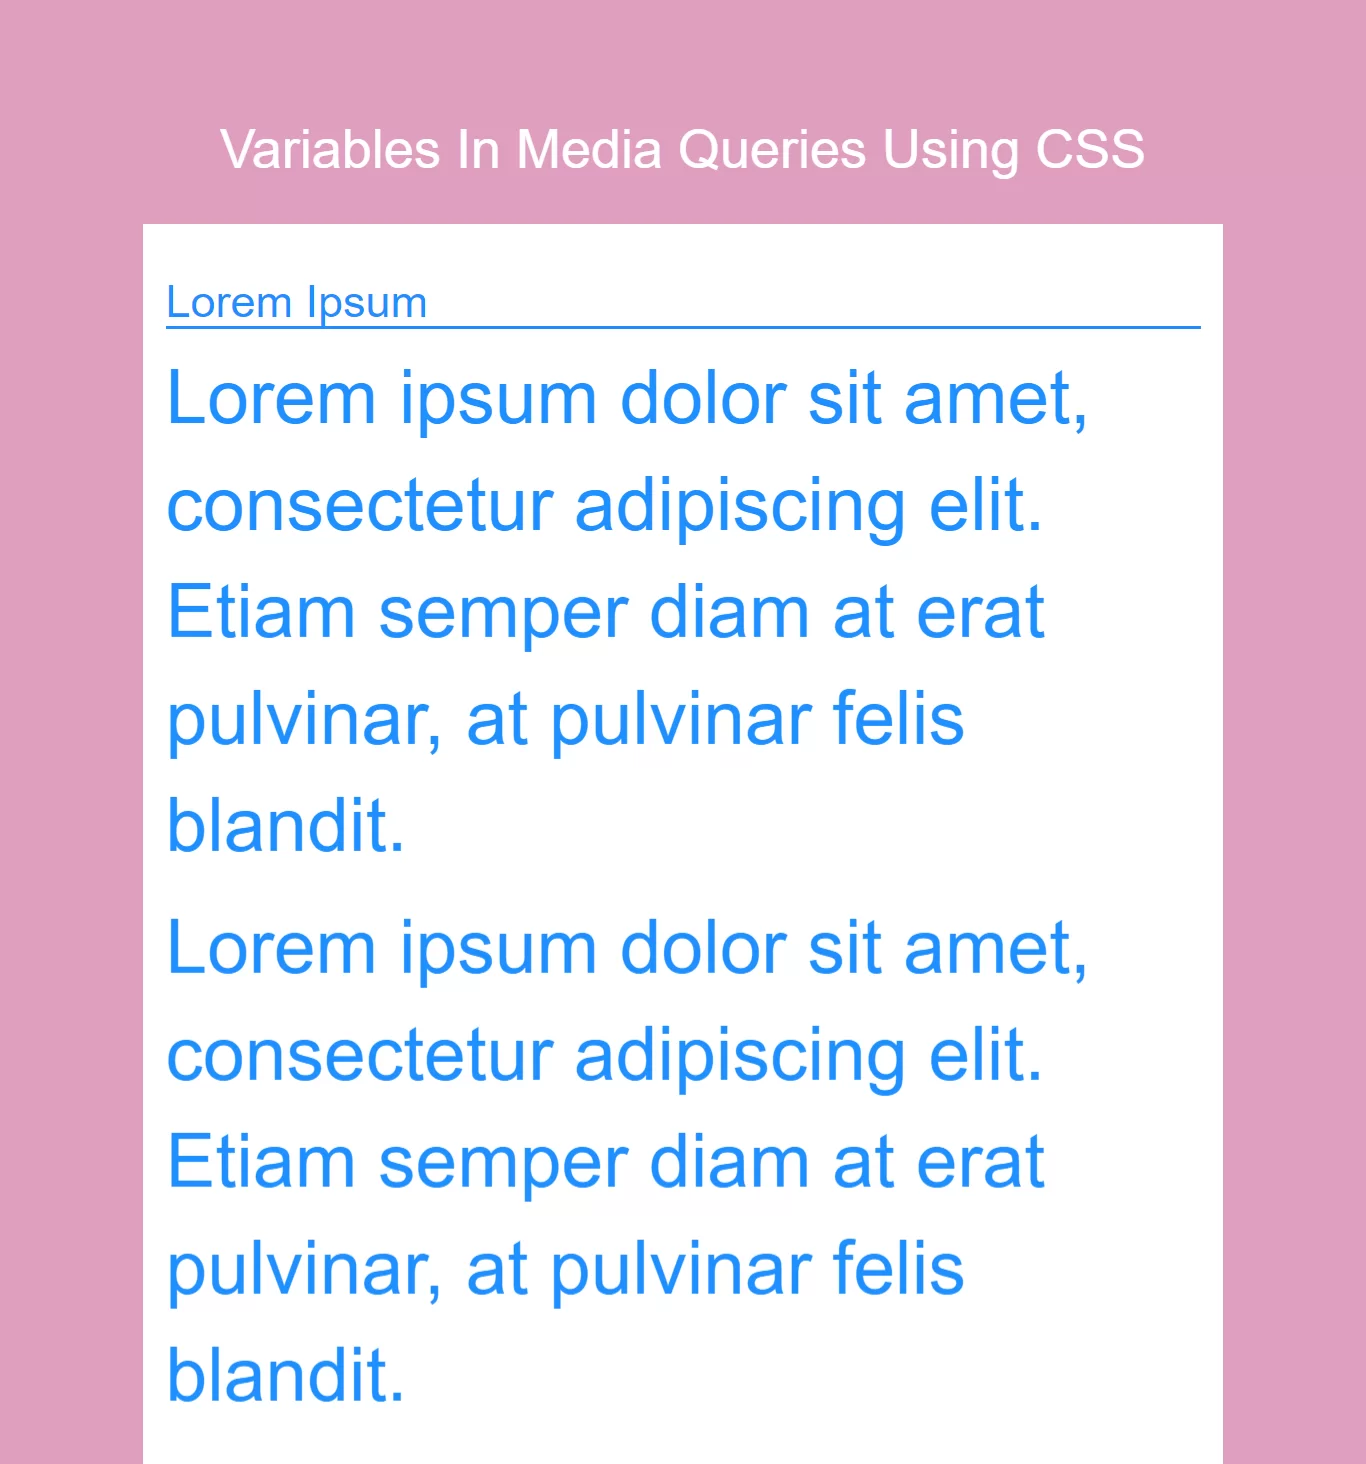 How To Define Variables In Media Queries Using CSS